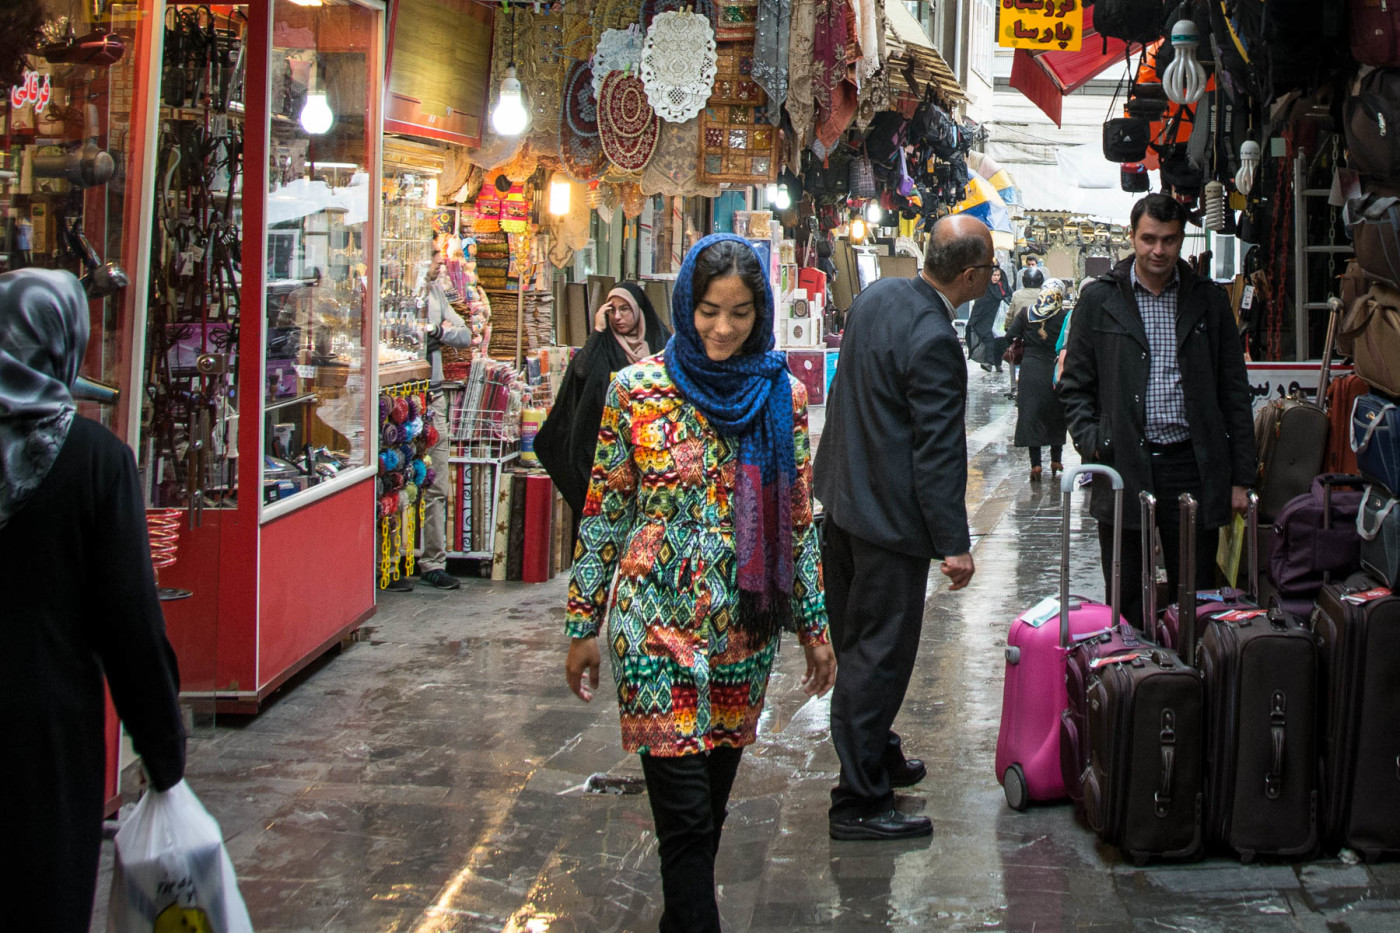 travelling to iran as a woman